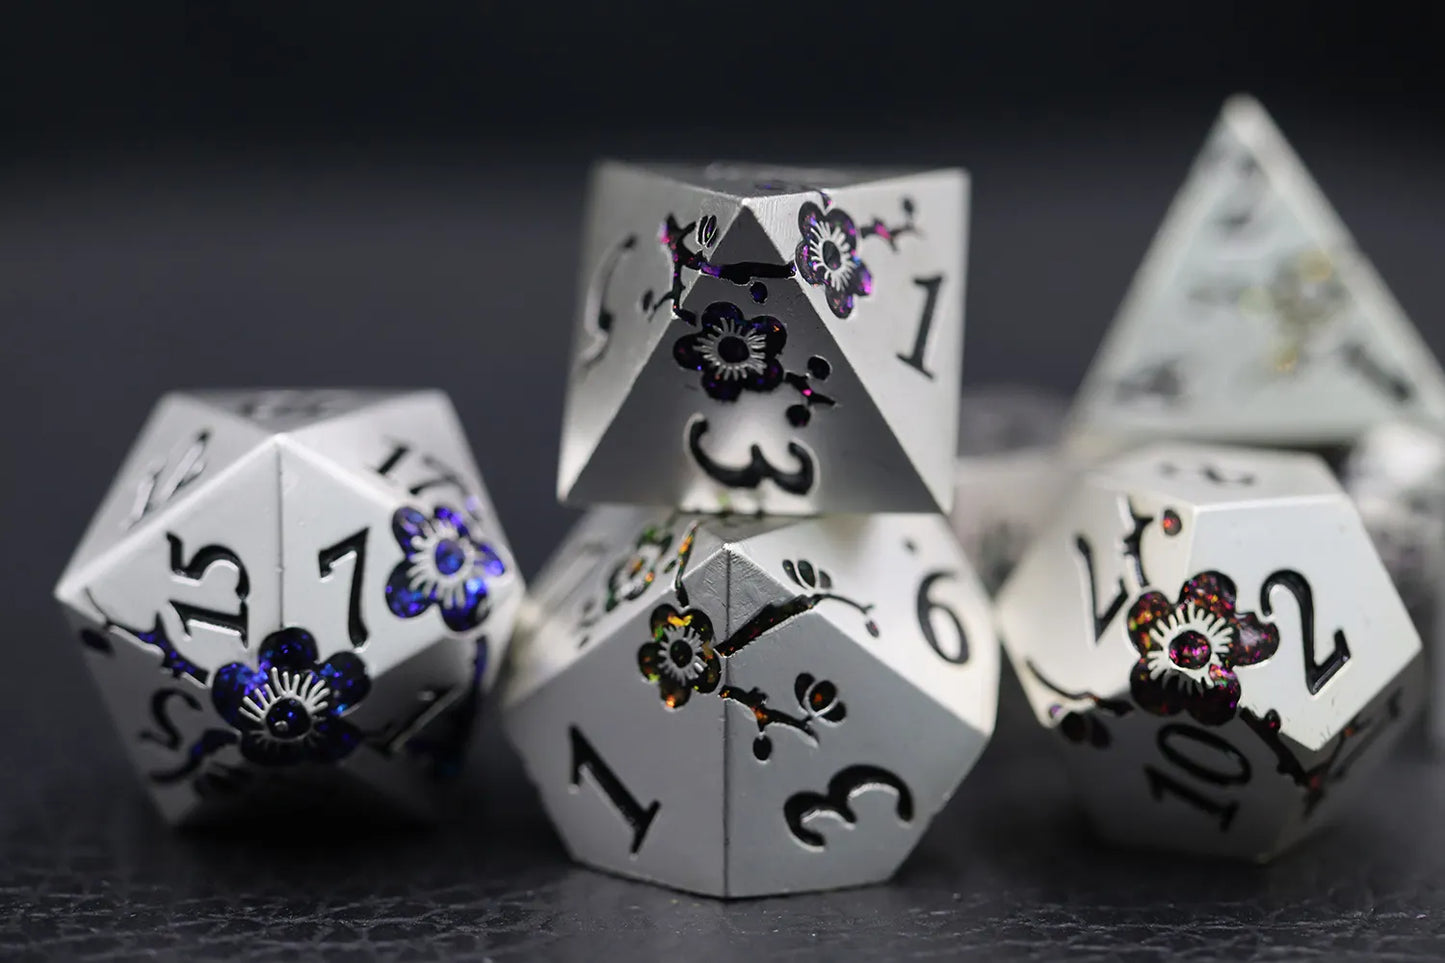 7 Colour Blossoms on Pearl Silver Metal Dice Set